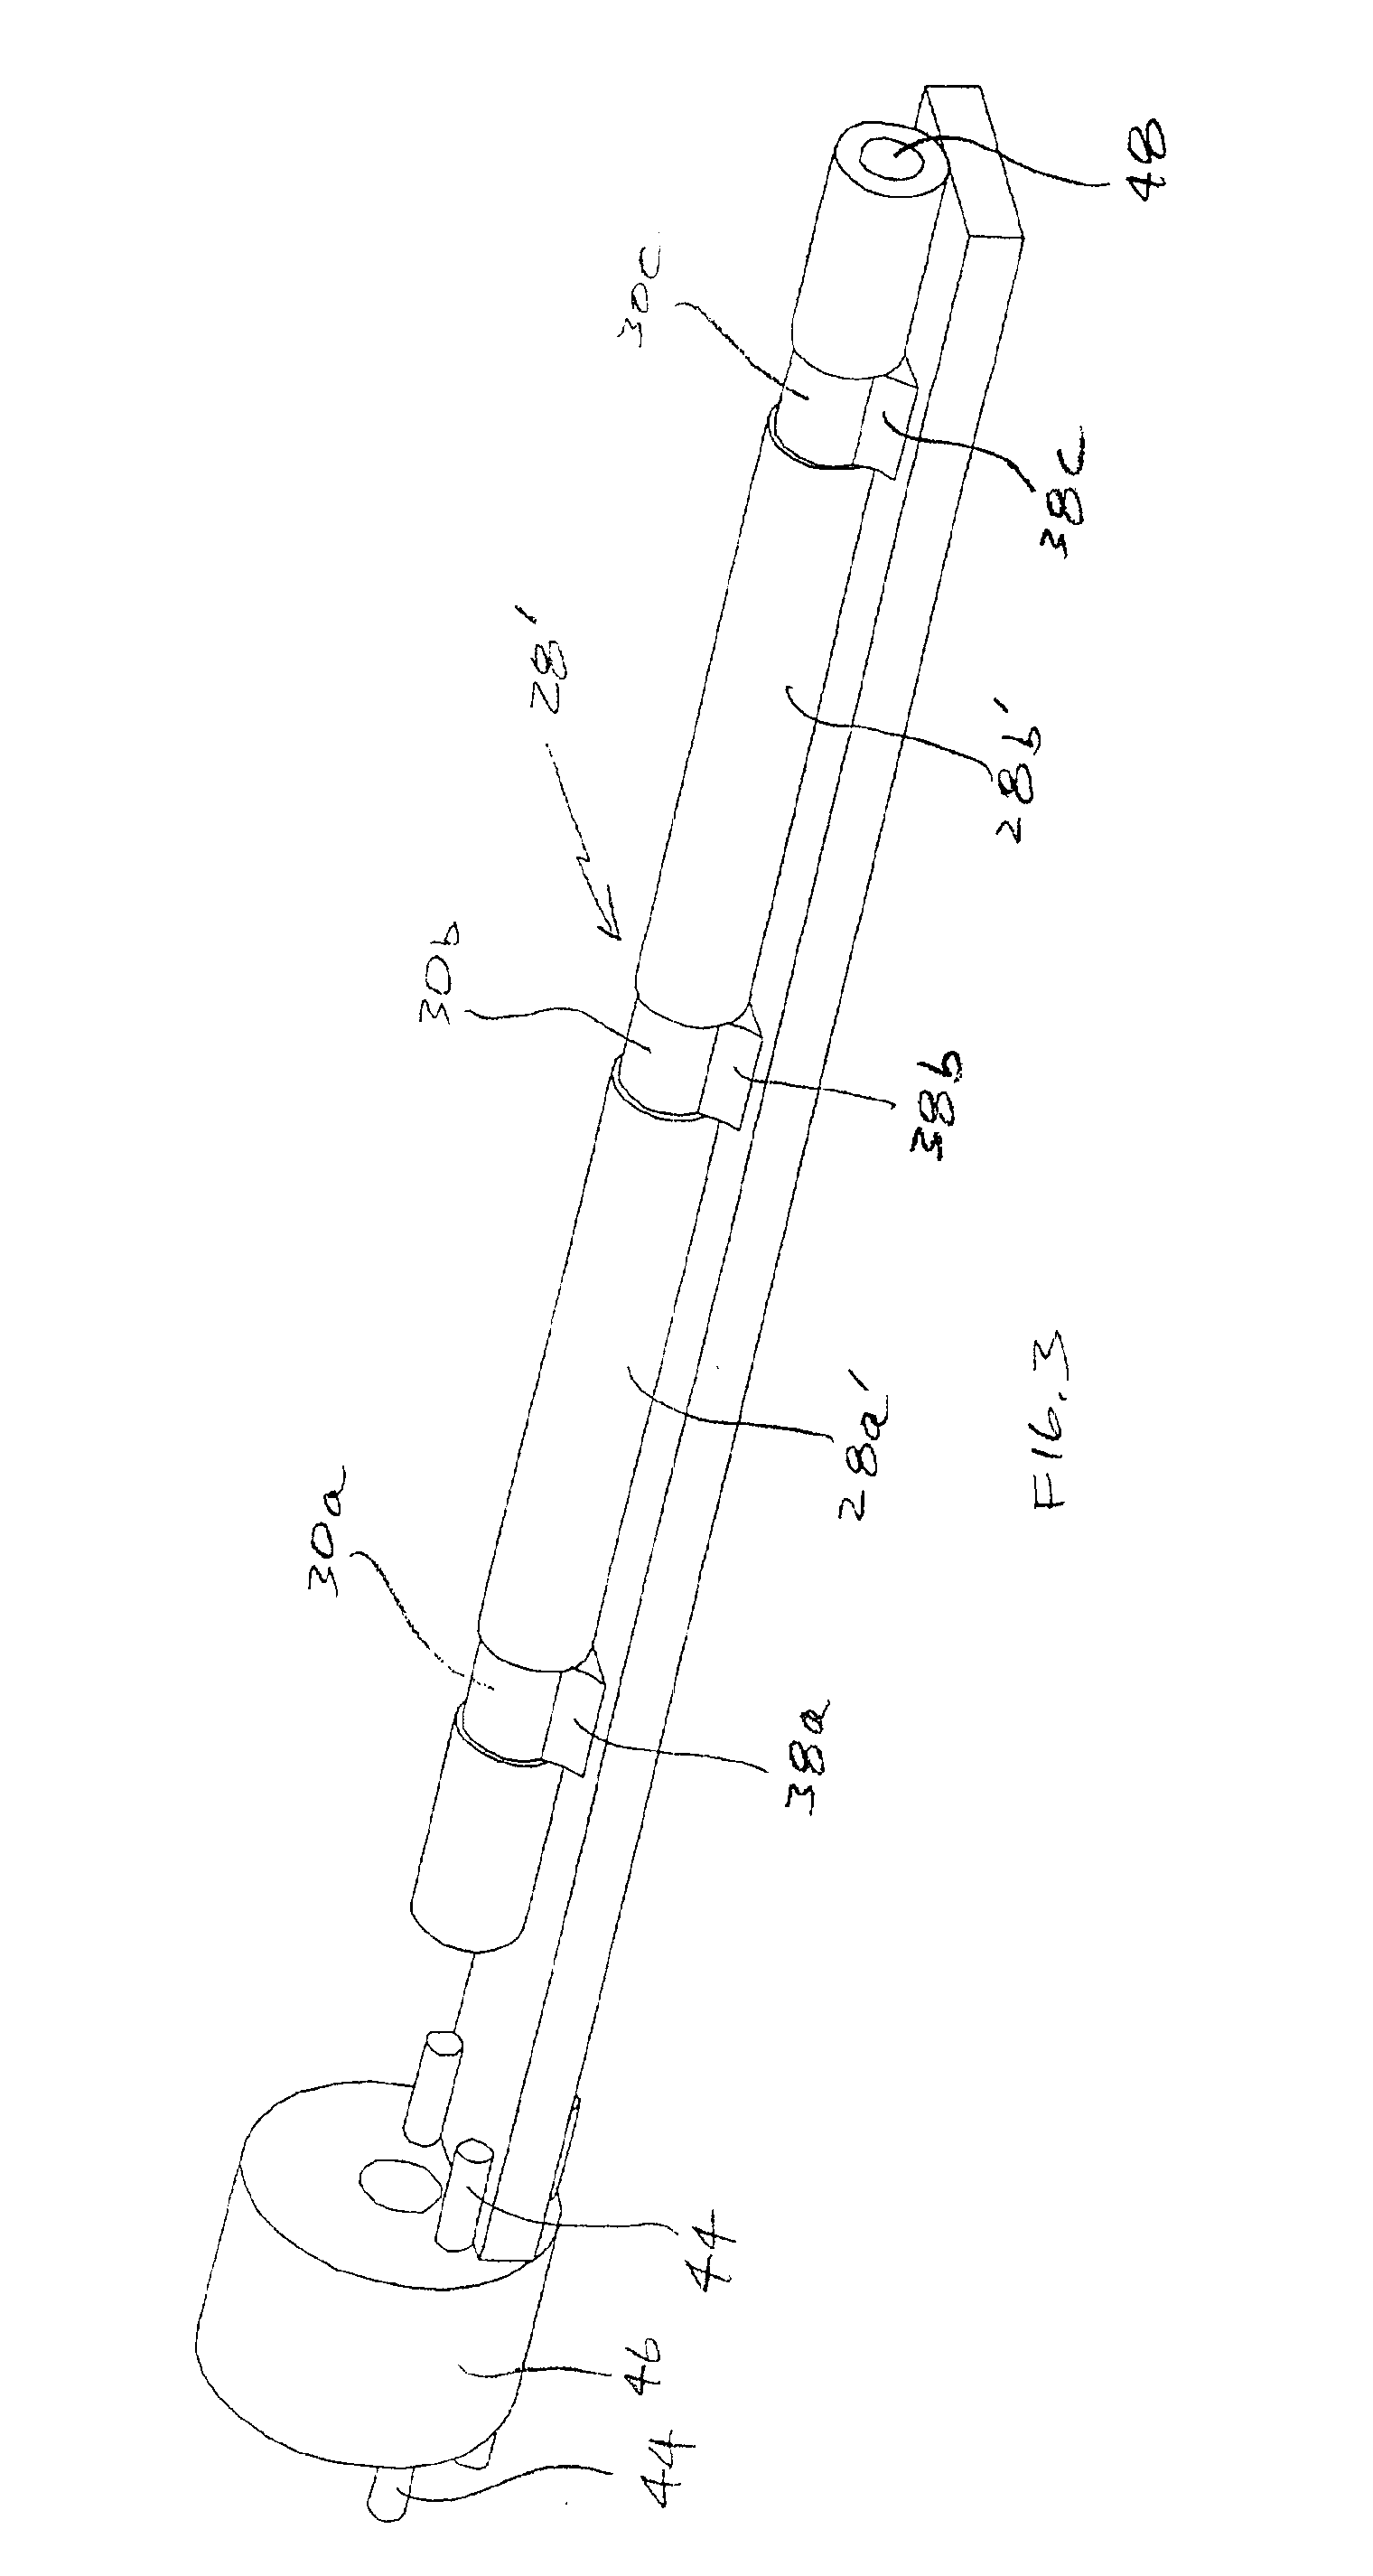 Method of fabricating a coil and clamp for variable reluctance transducer